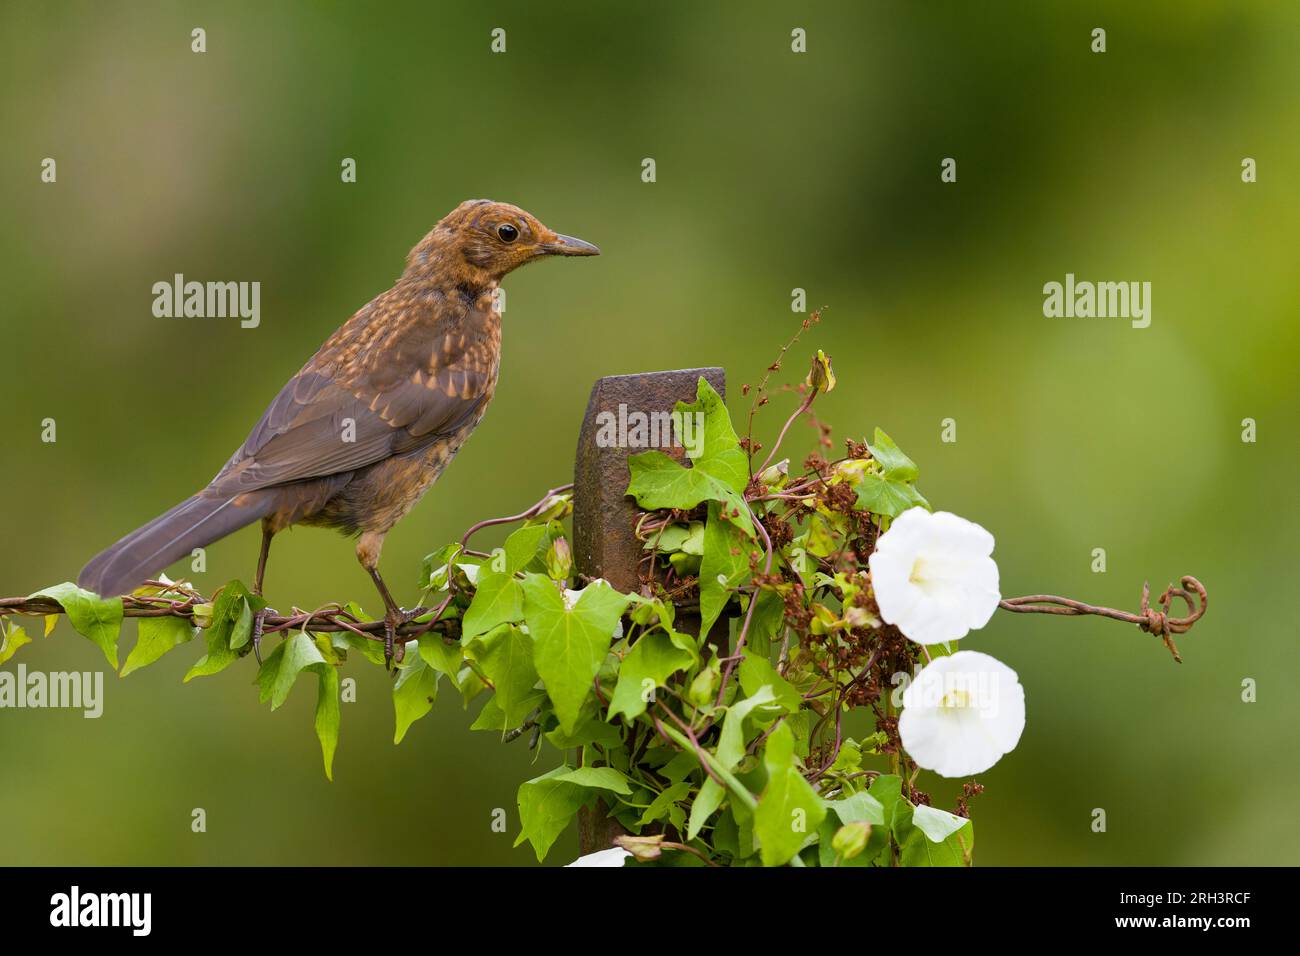 Common blackbird Turdus merula, juvenile perched on post with Hedge bindweed Calystegia sepium, growing on it, Suffolk, England, August Stock Photo